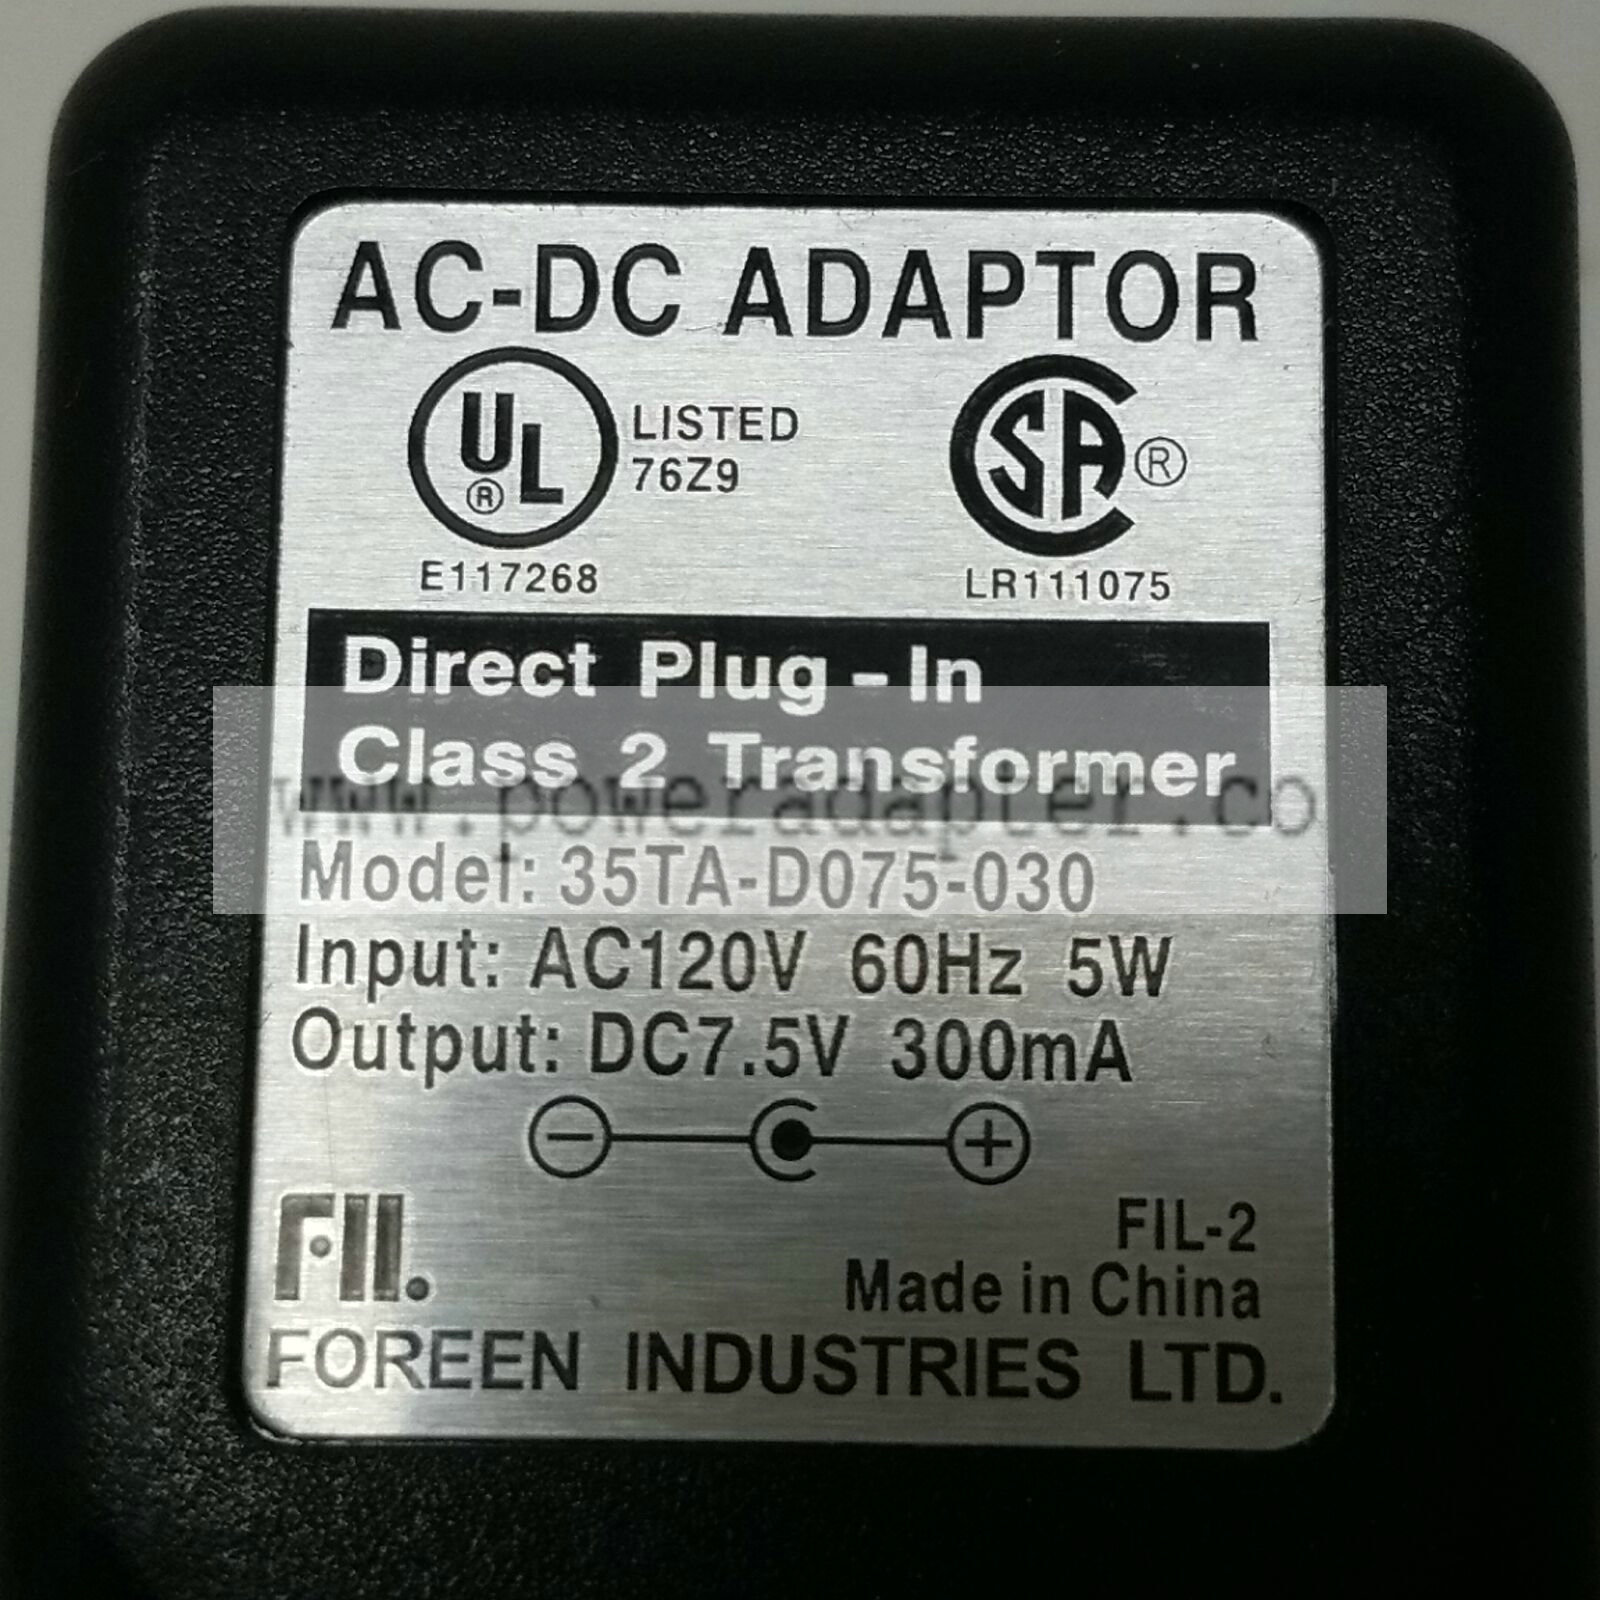 Foreen AC-DC Adaptor Charger 35TA-D075-030 Output 7.5VDC 300mA Brand: Foreen Industries Ltd. MPN: 35TA-D075-030 Mo